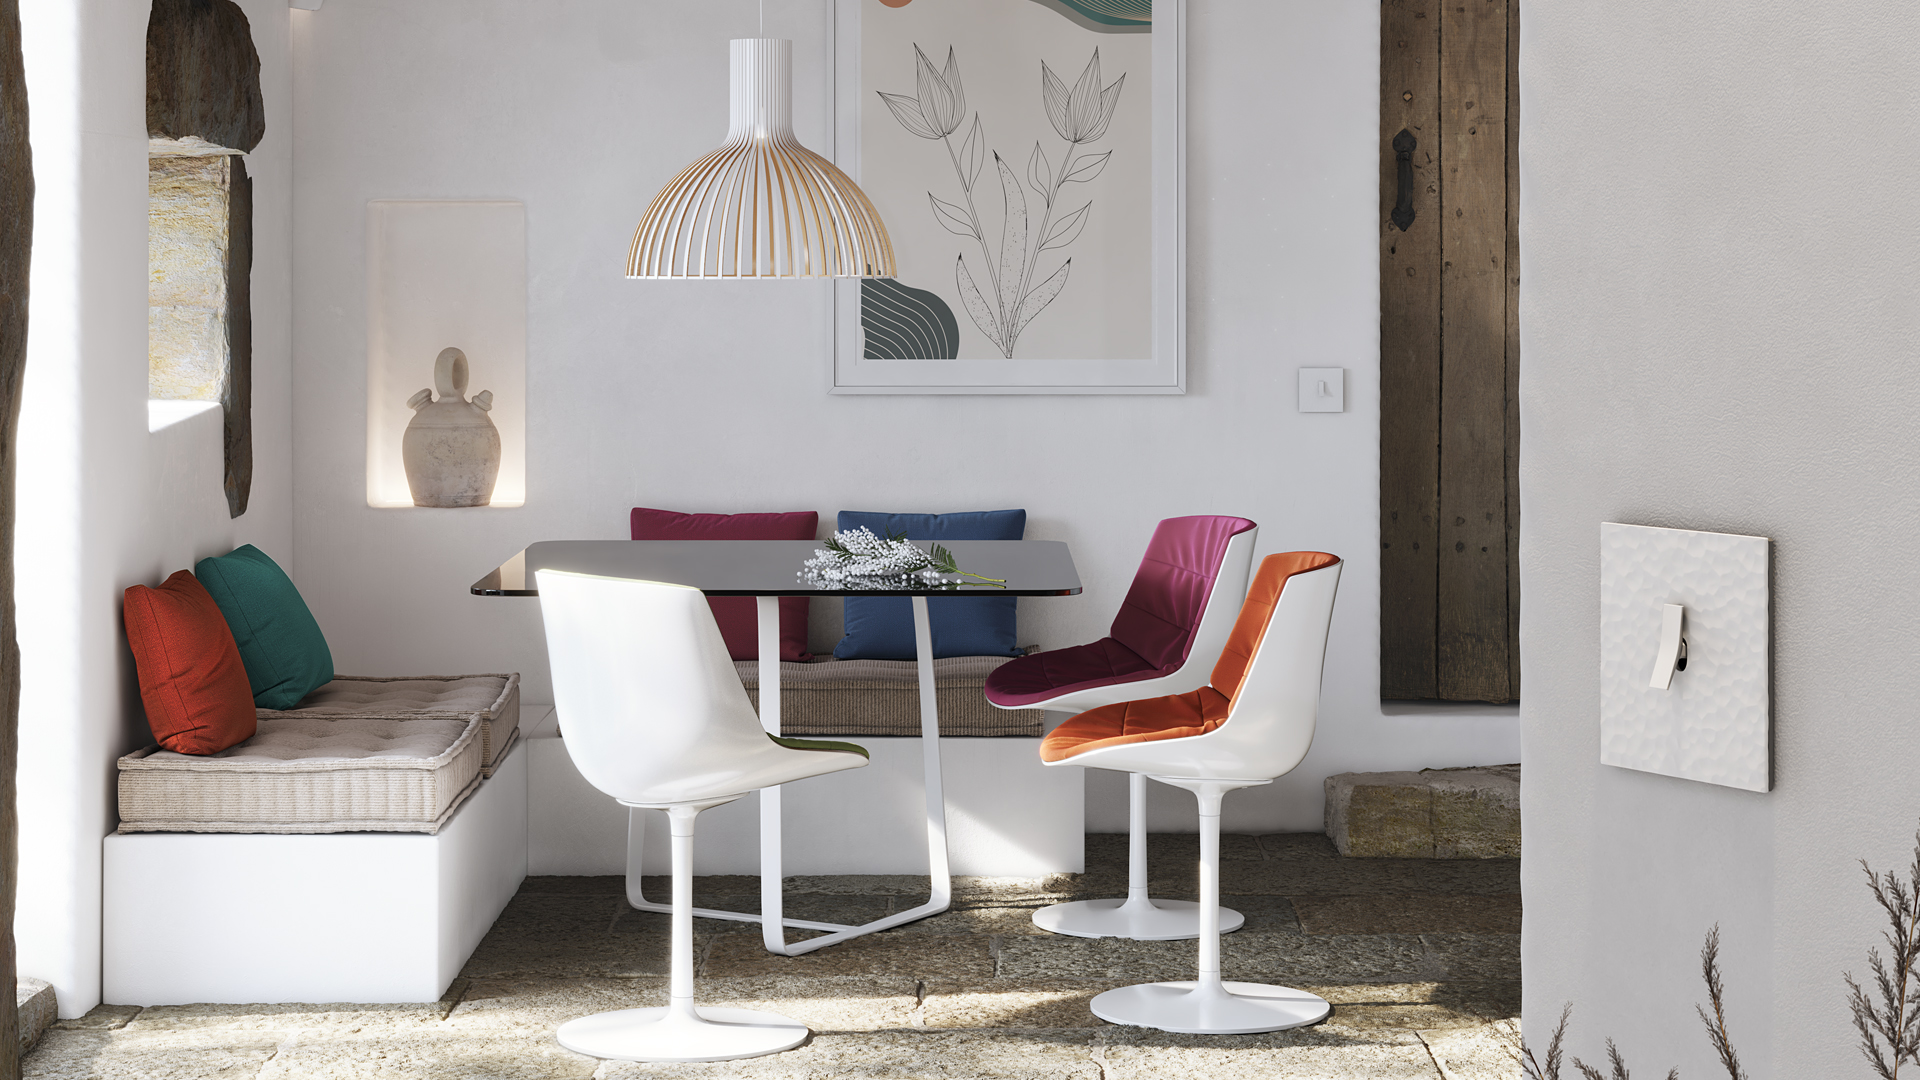 Balearic Collection by Font Barcelona